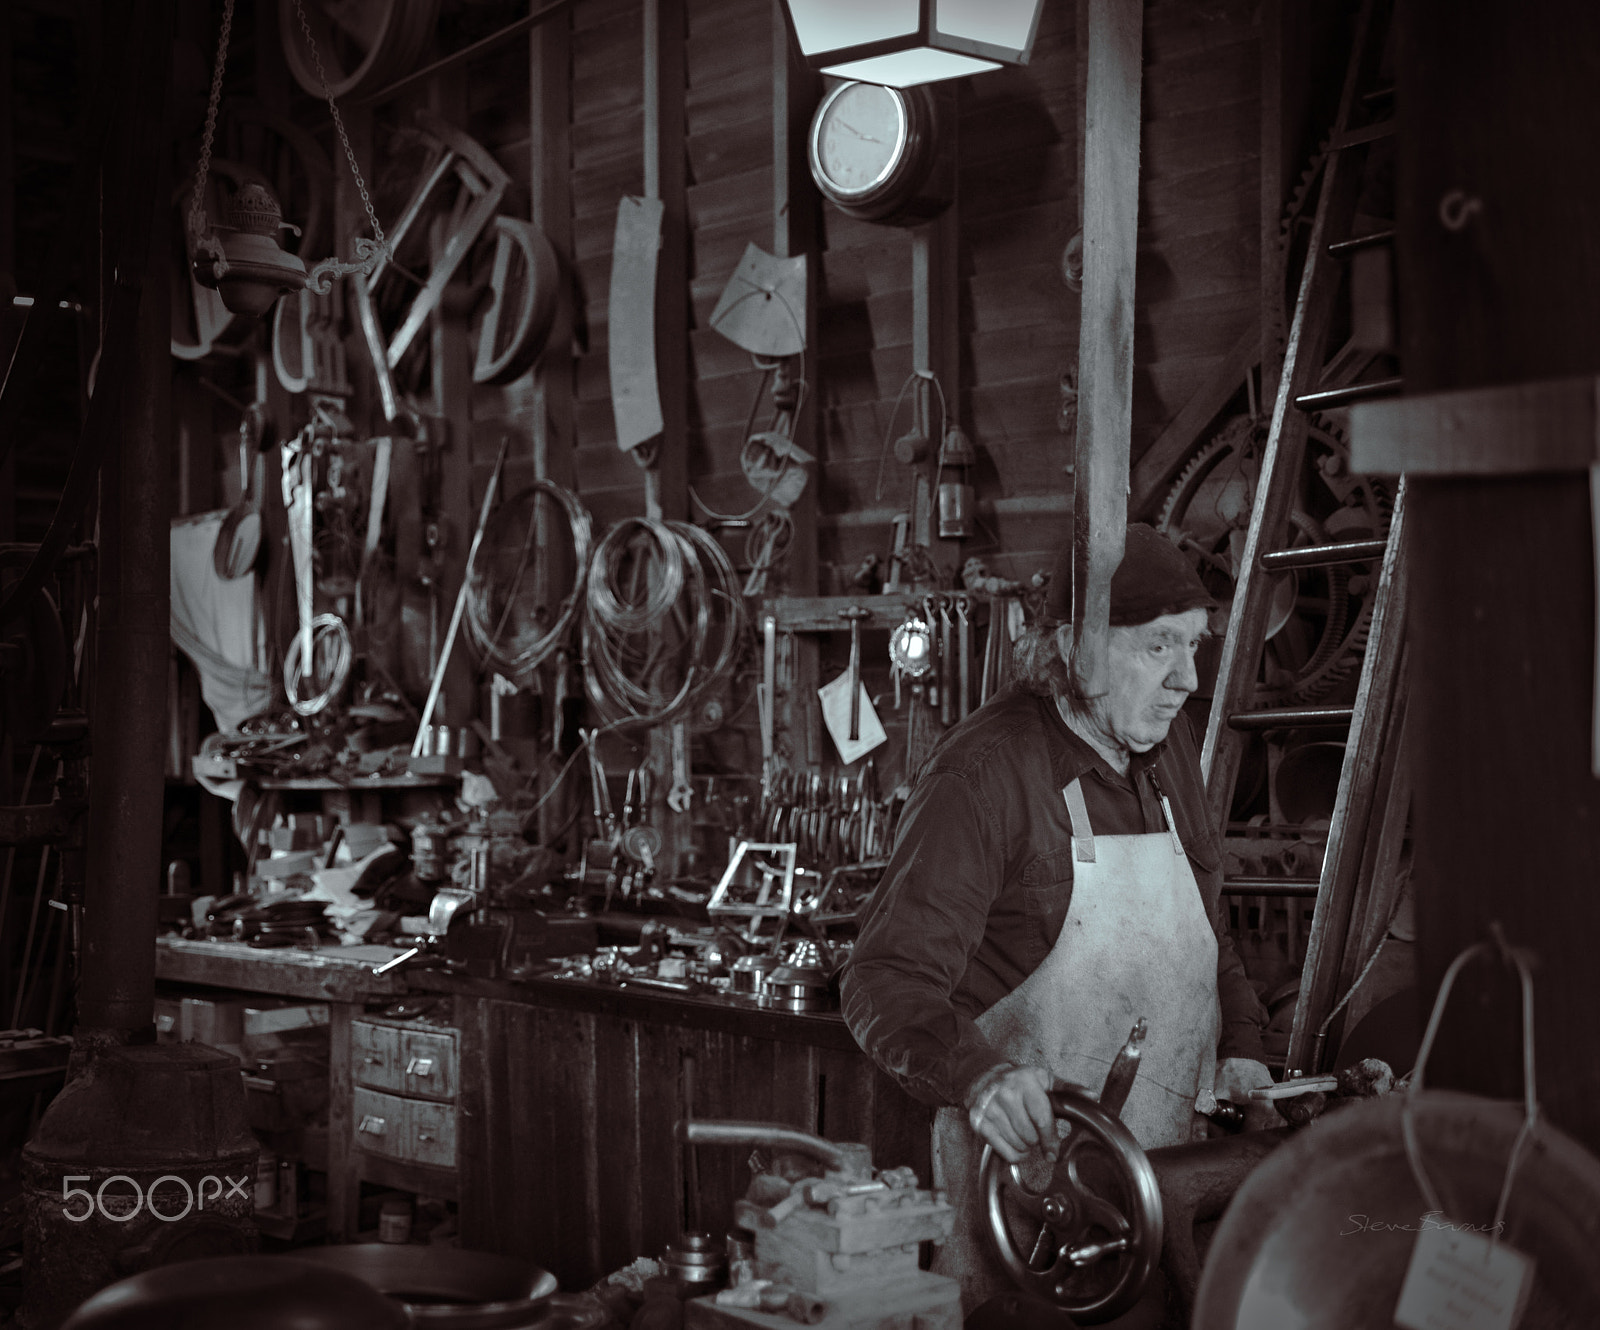 Pentax K-1 sample photo. The ironmonger works amidst a shed full of tools and creations see sovereignhill.com.au photography